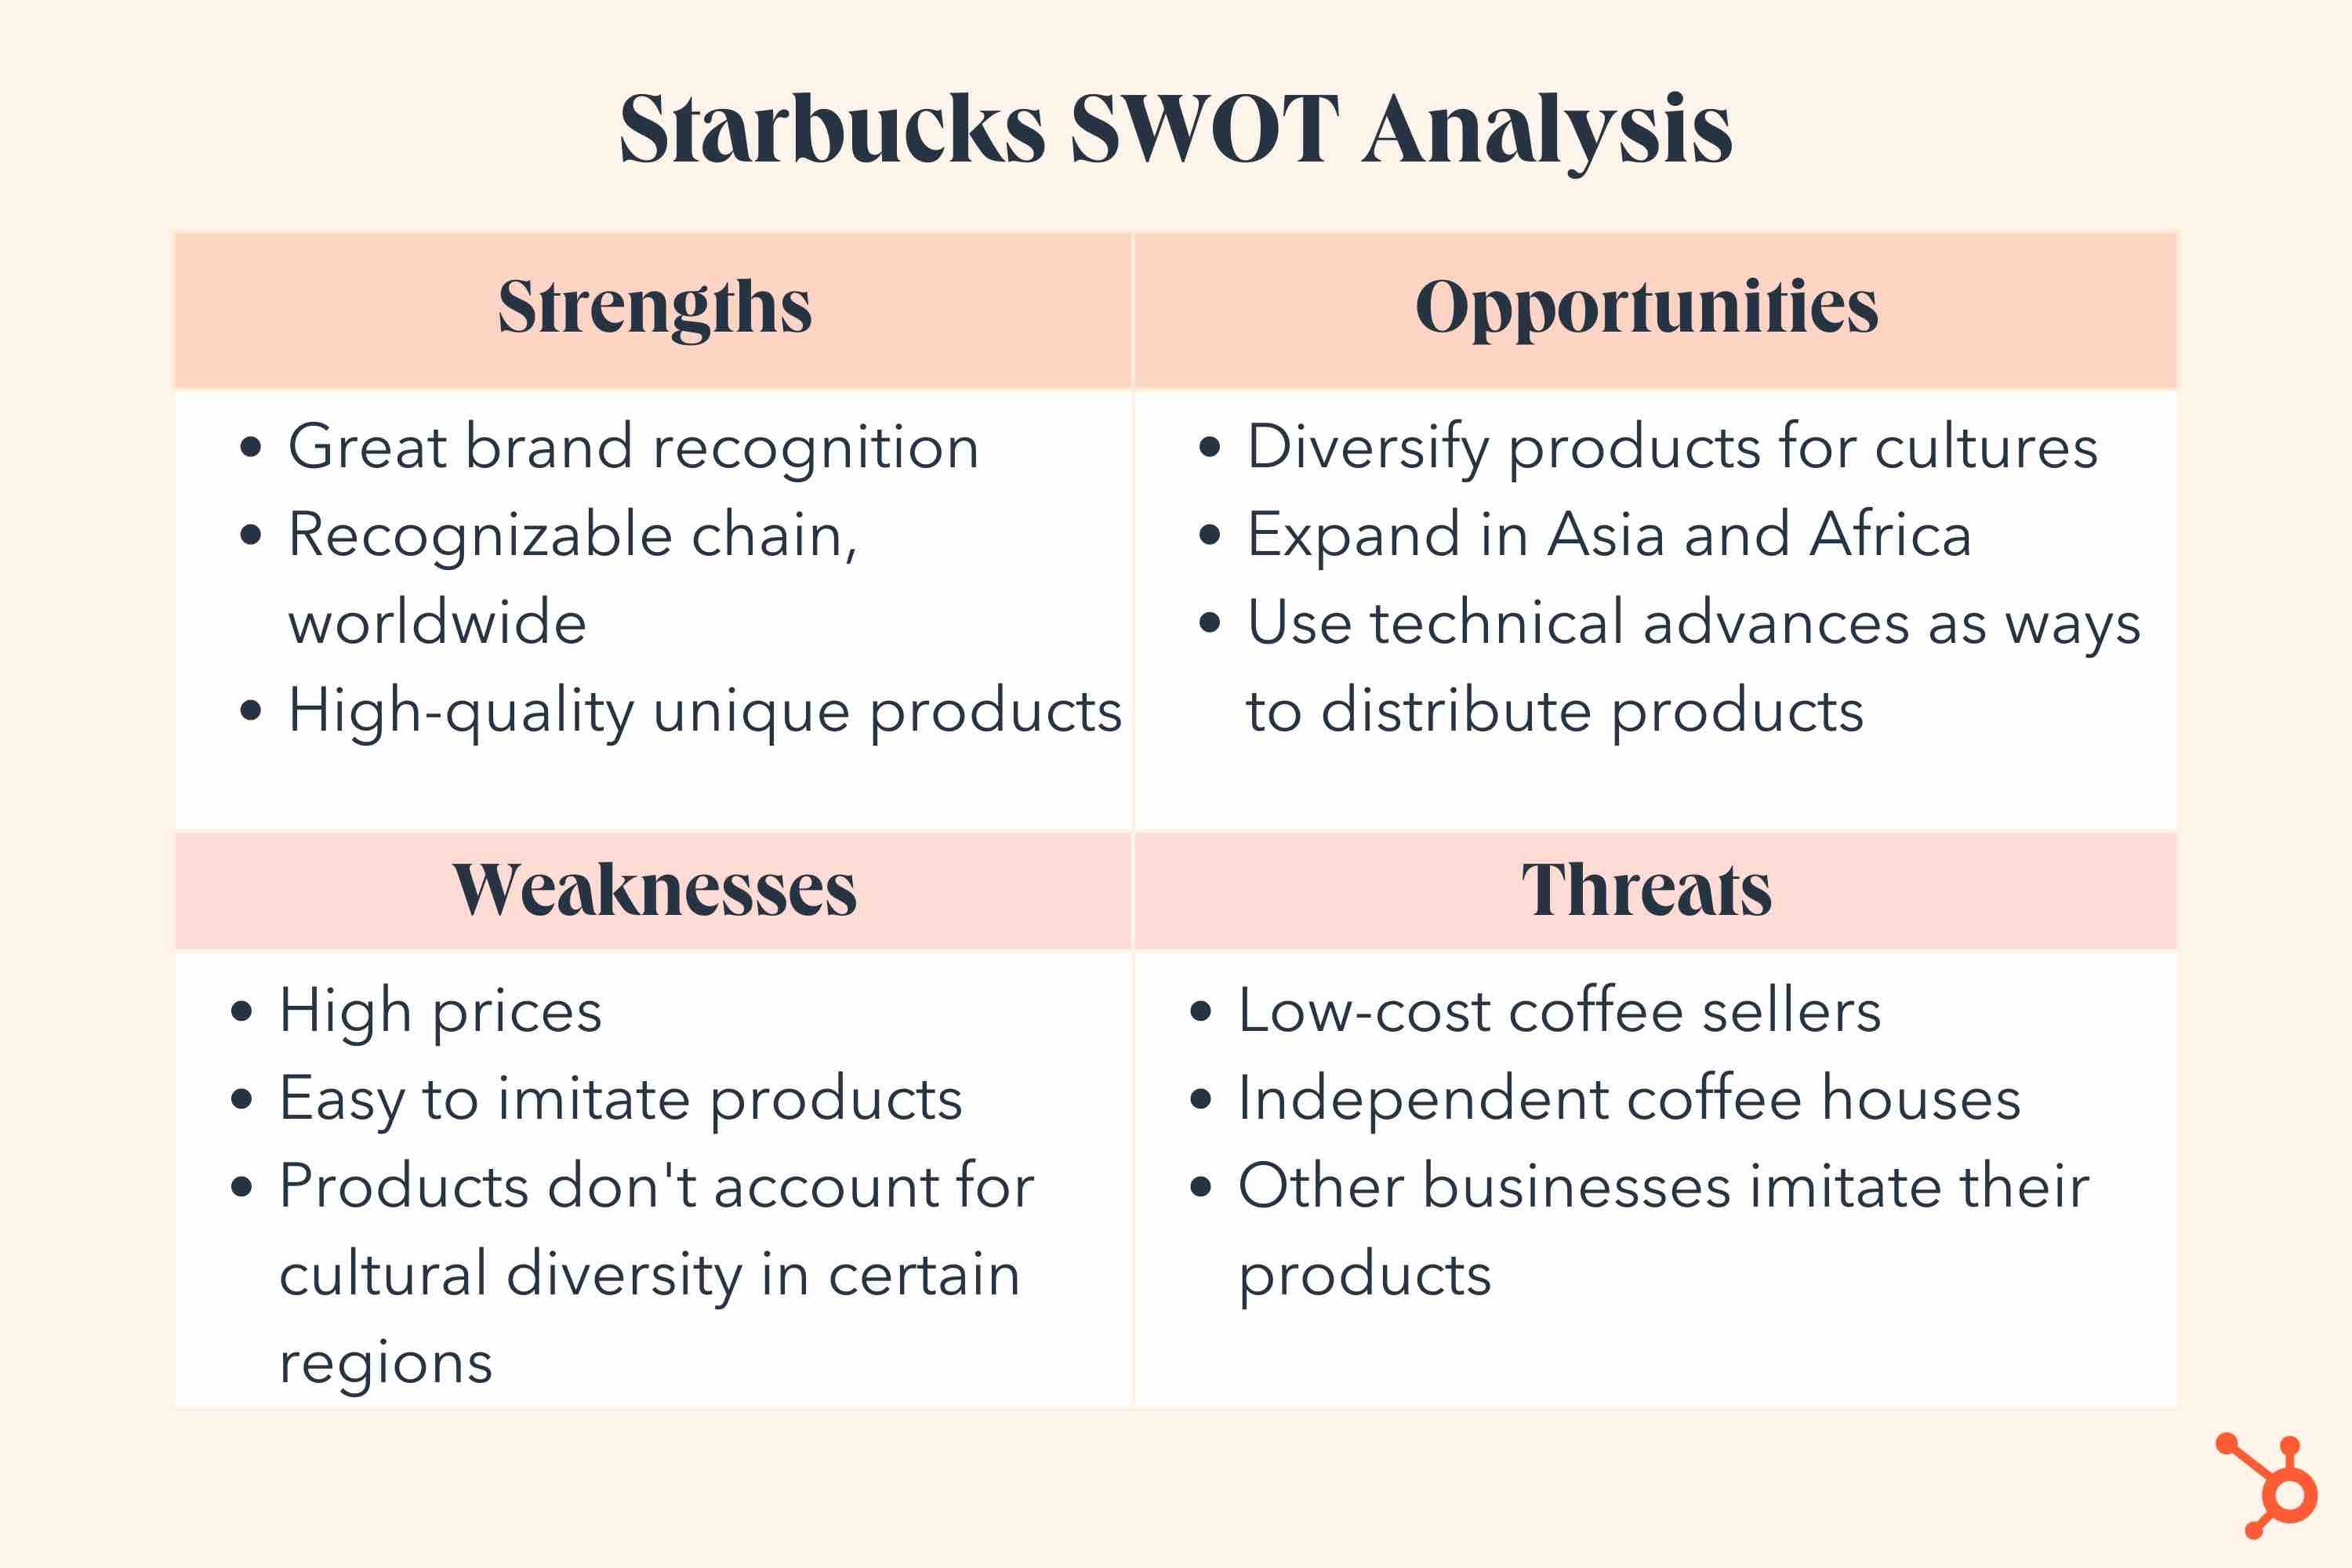 swot analysis starbucks.jpg?width=3000&height=2000&name=swot analysis starbucks - SWOT Analysis: How To Do One [With Template &amp; Examples]